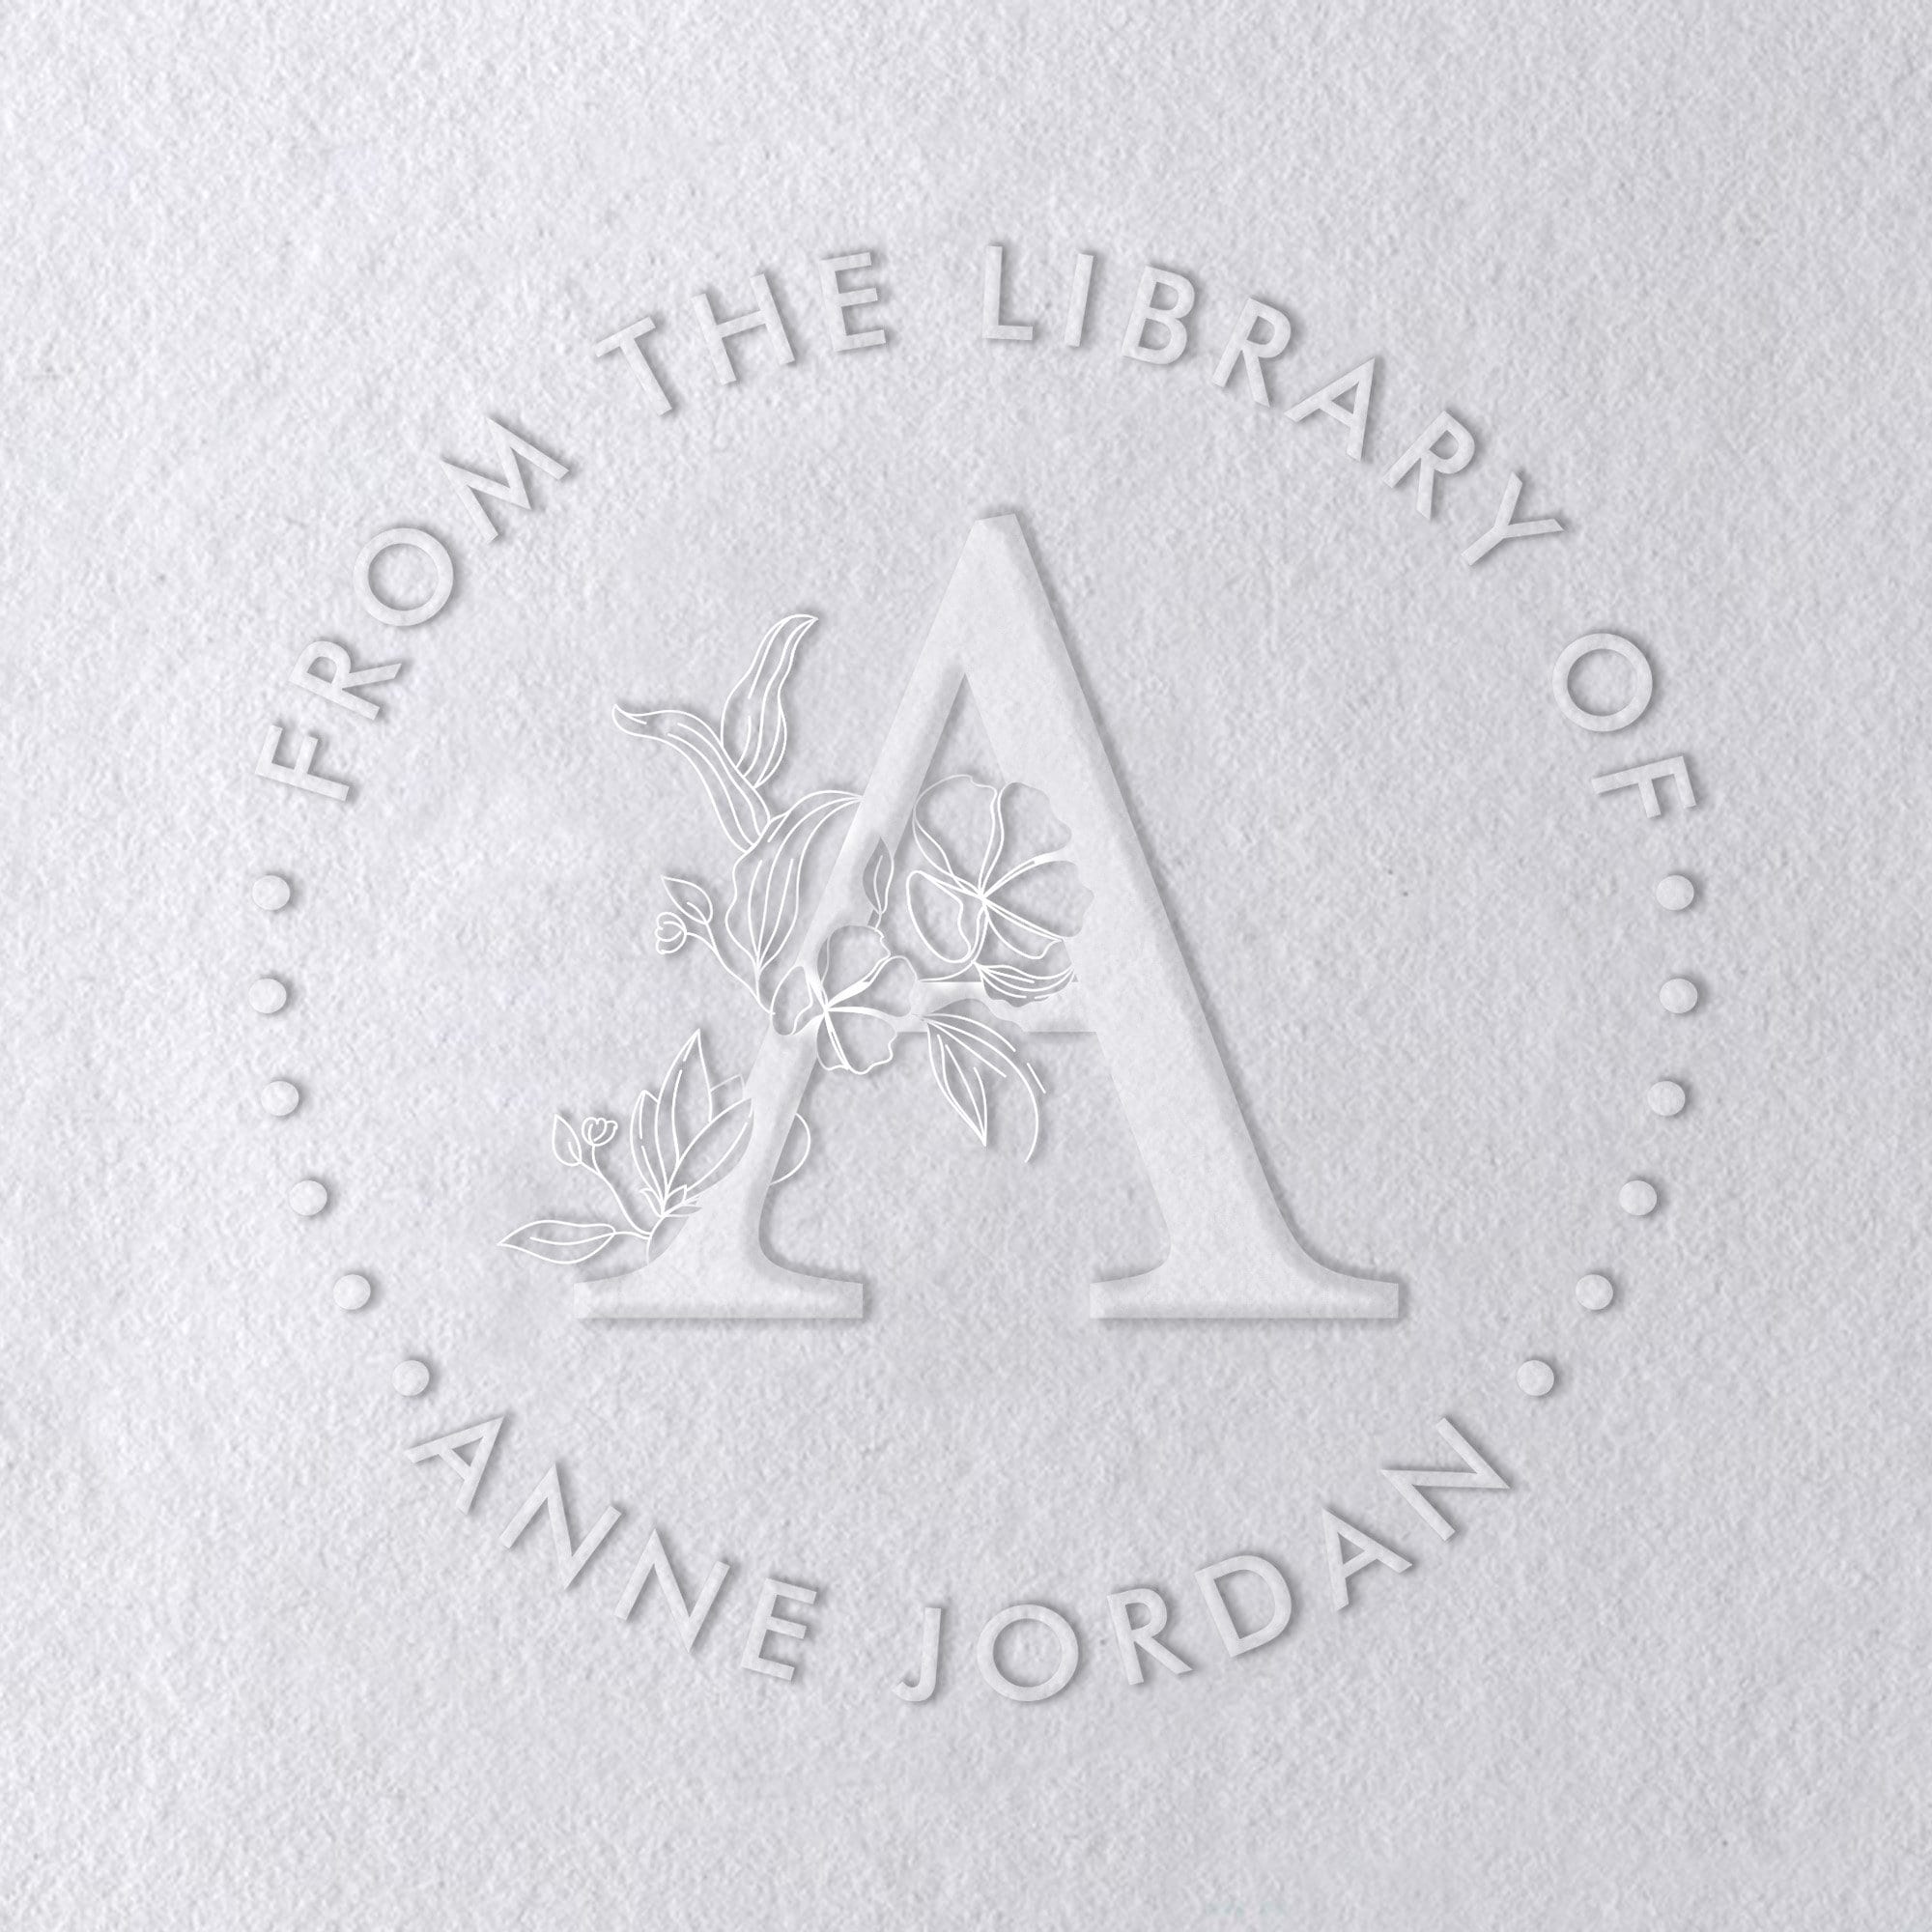 Custom Initials Library Embosser Stamp ,book Embosser, From the Library of  Embosser Stamp,library Stamp, Valentines Day Gift 